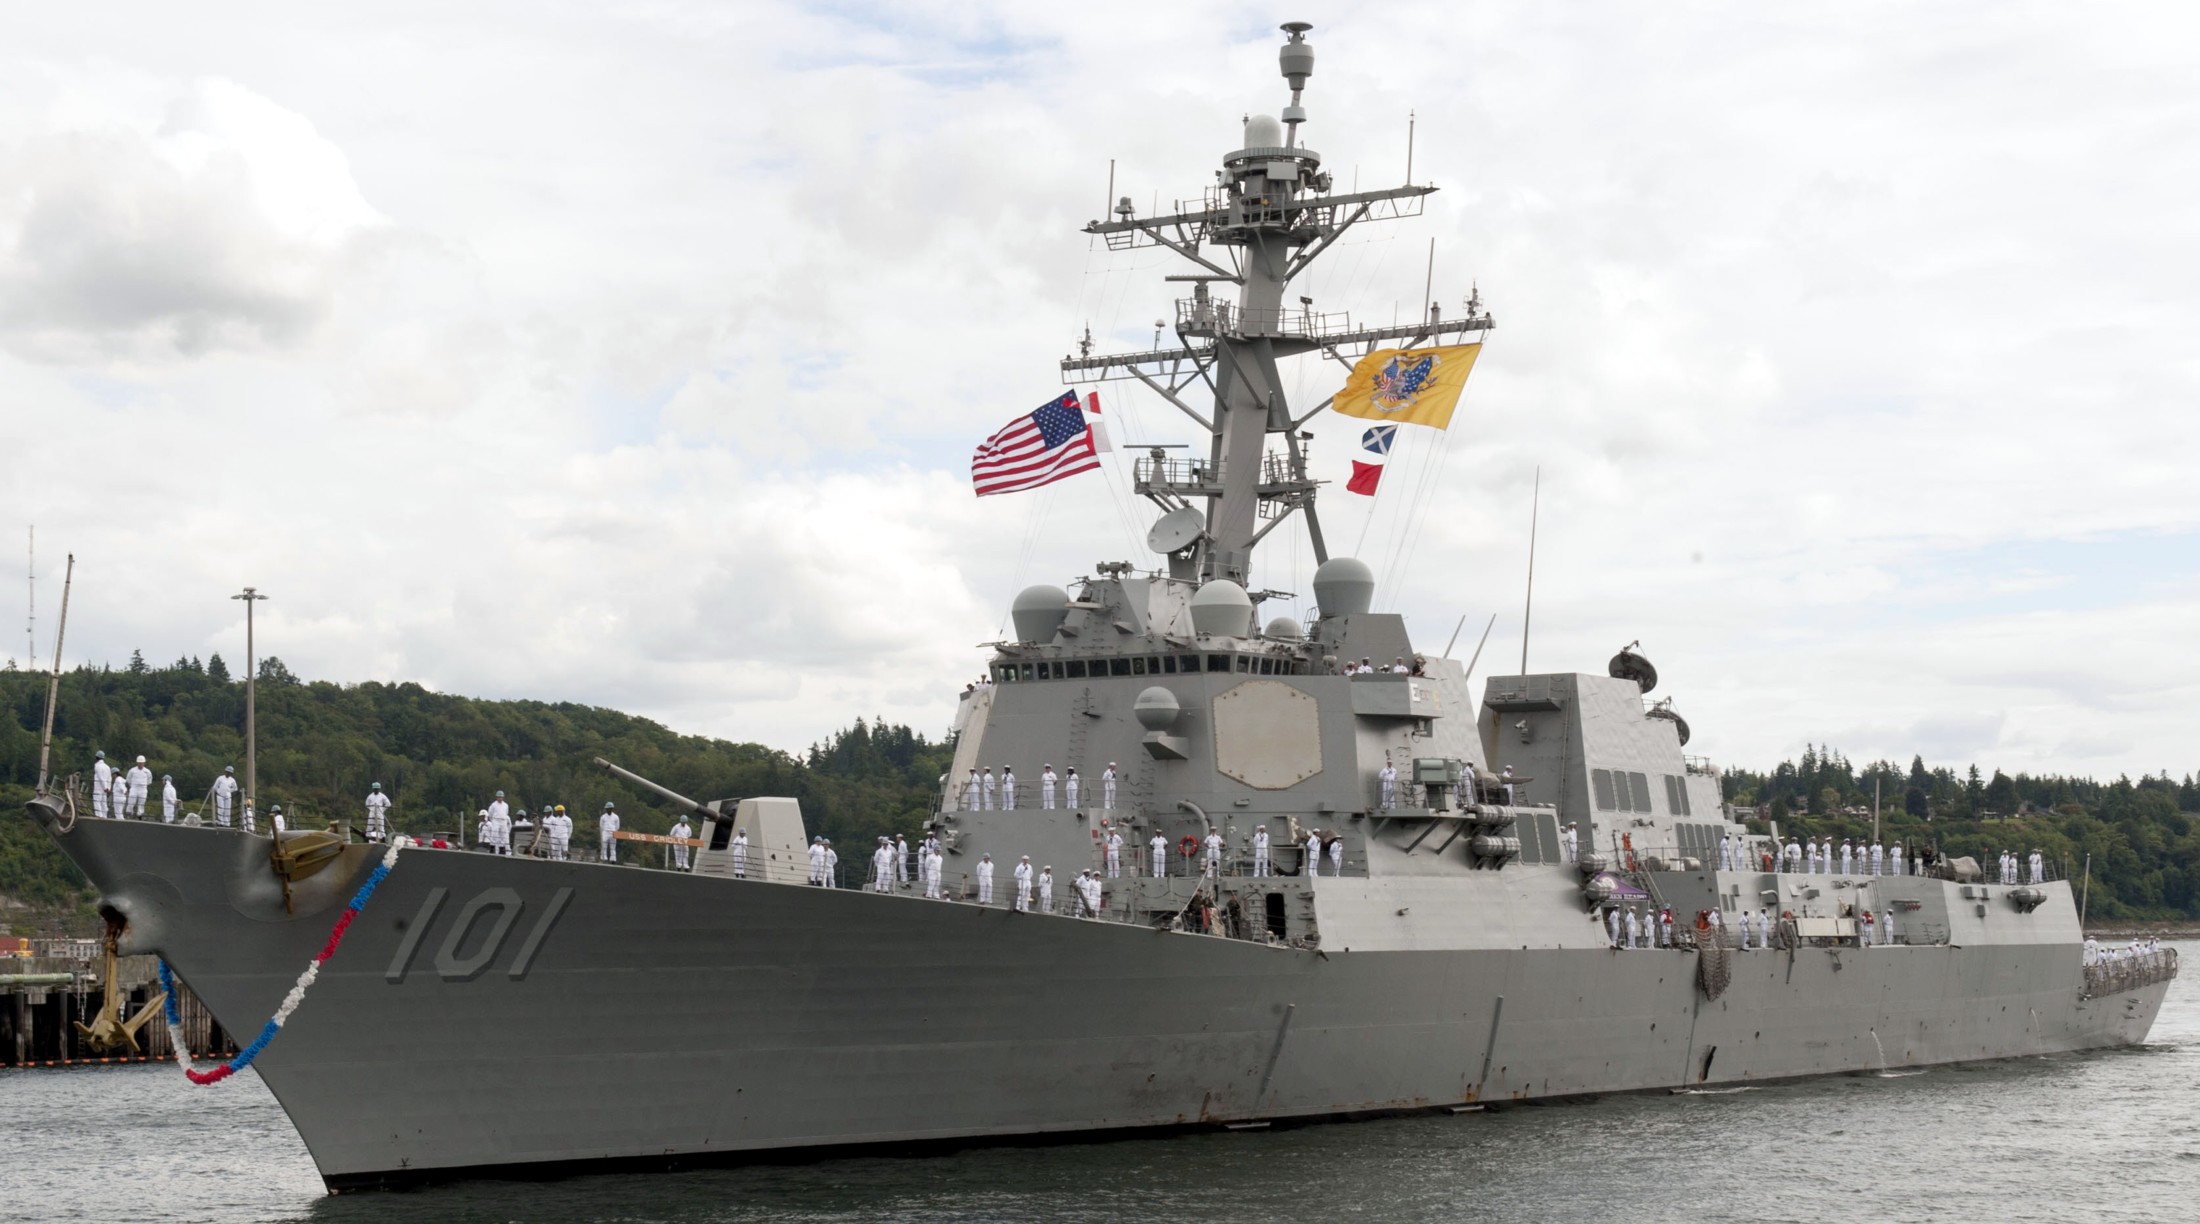 ddg-101 uss gridley arleigh burke class guided missile destroyer aegis us navy 52